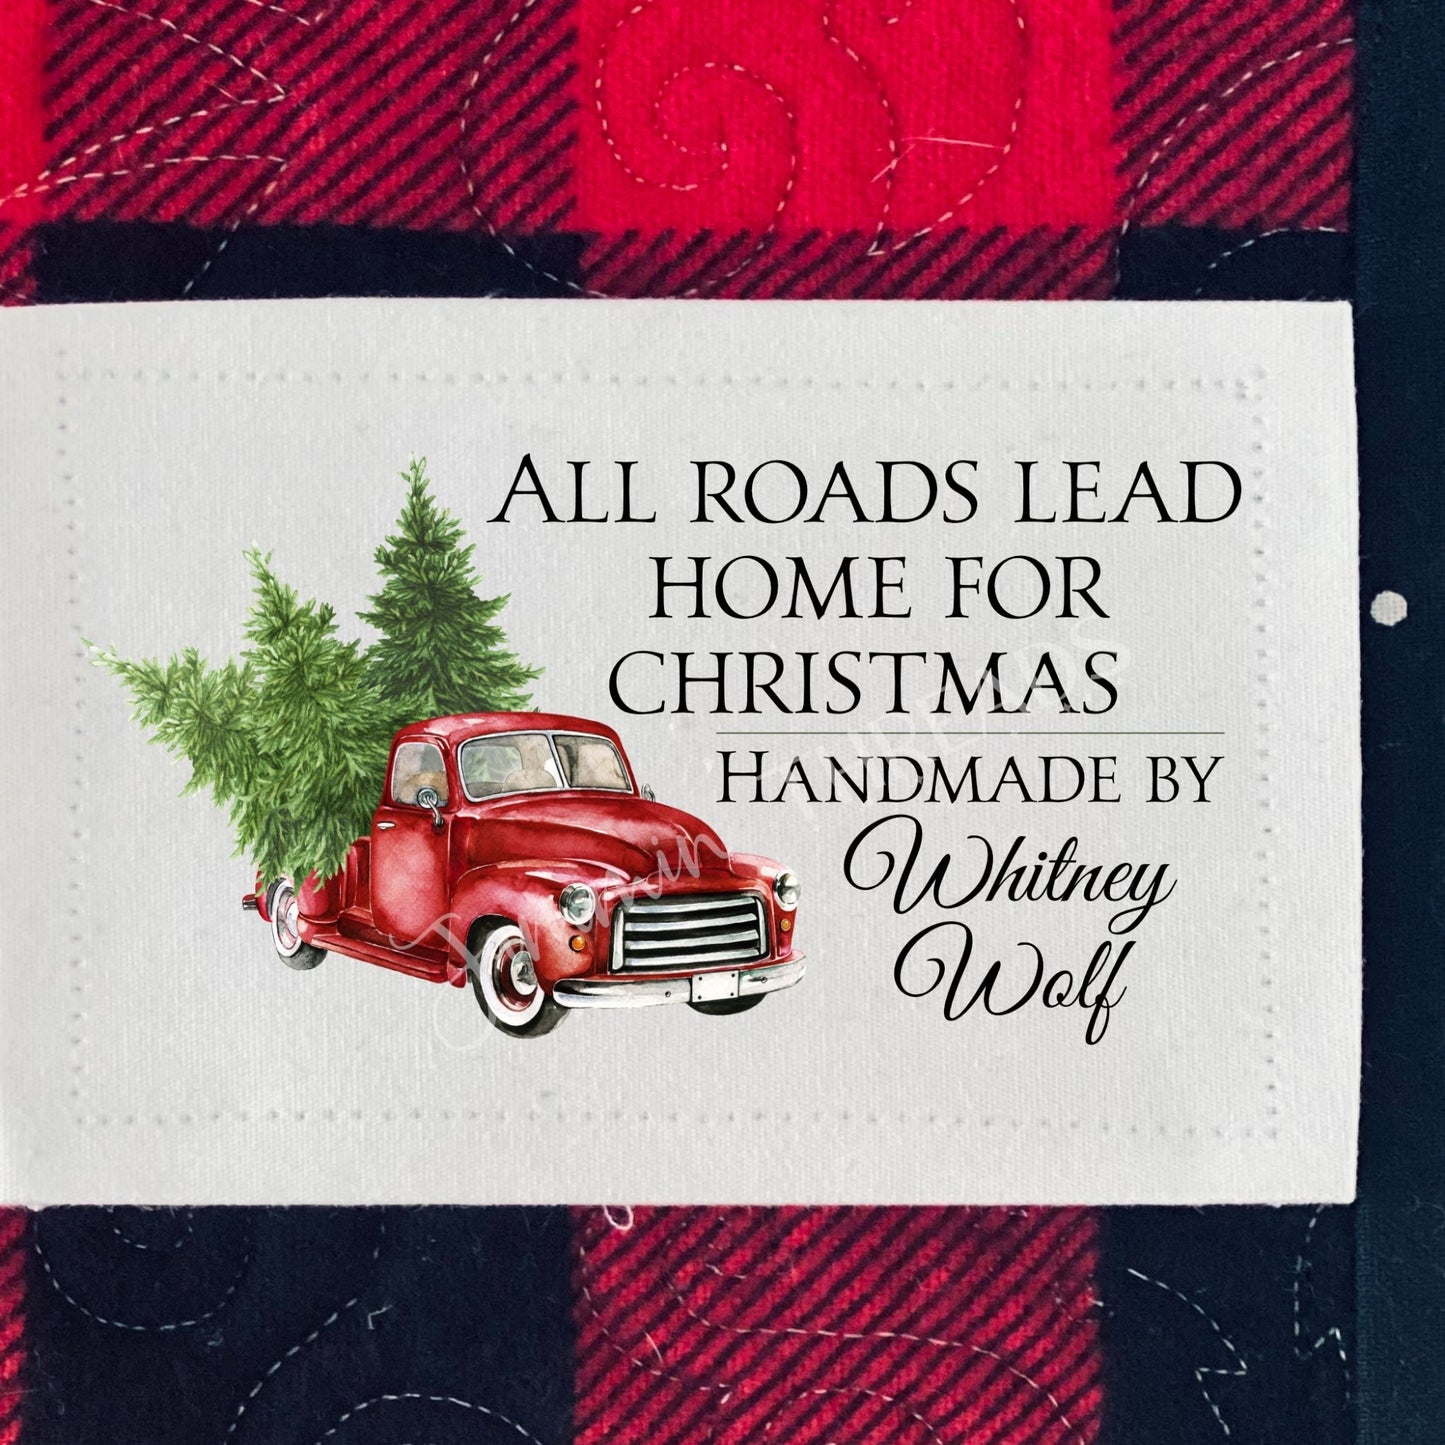 All Roads Lead Home for Christmas. Personalized Christmas quilt labels - Jammin Threads